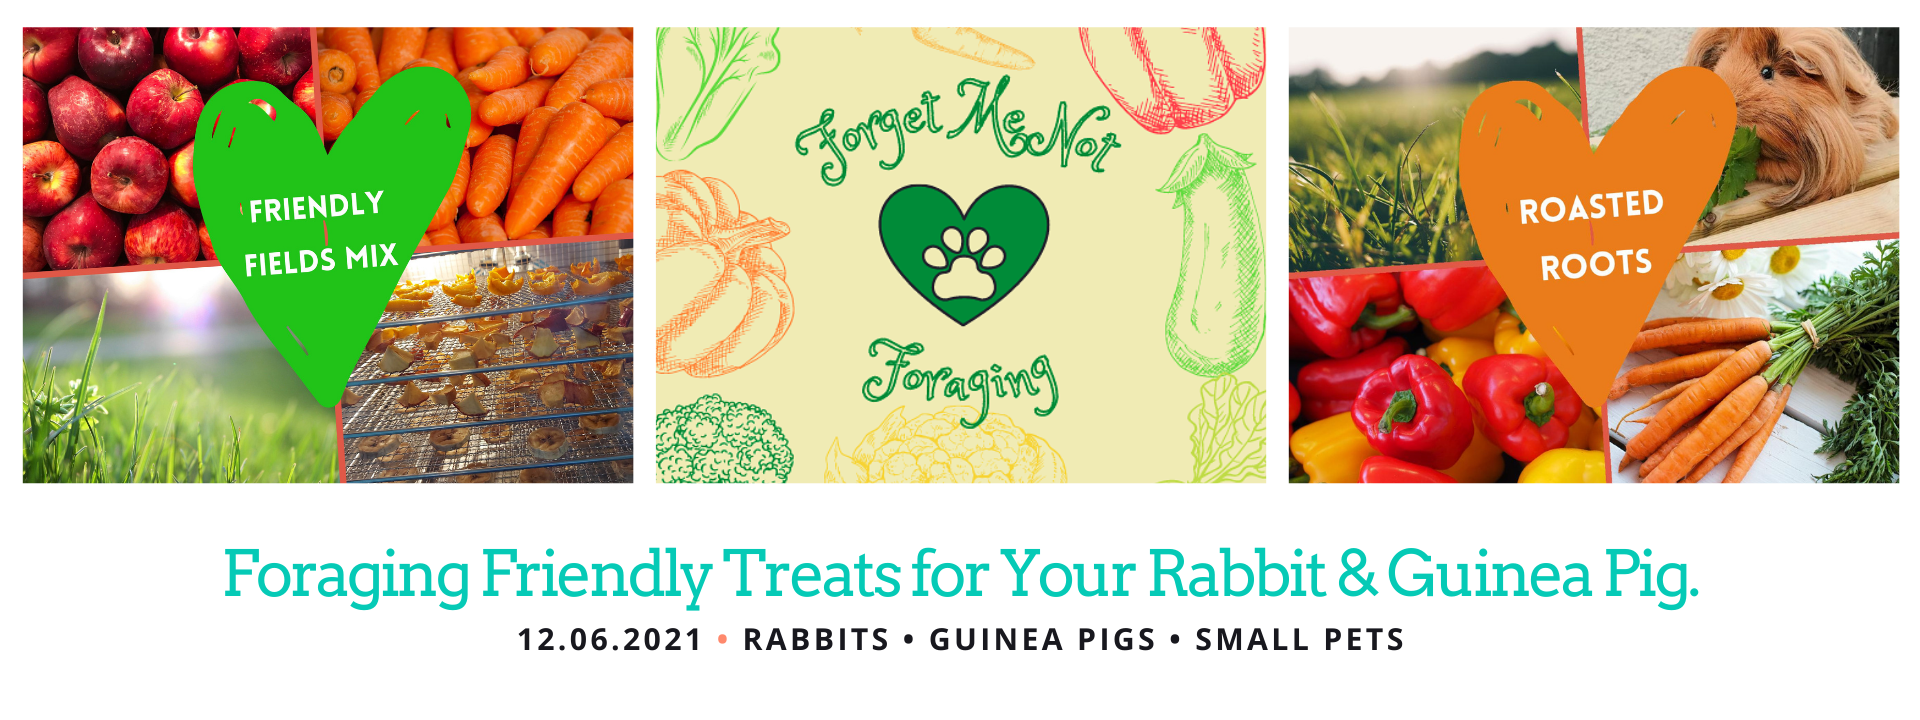 Foraging Friendly Treats for Small Pets